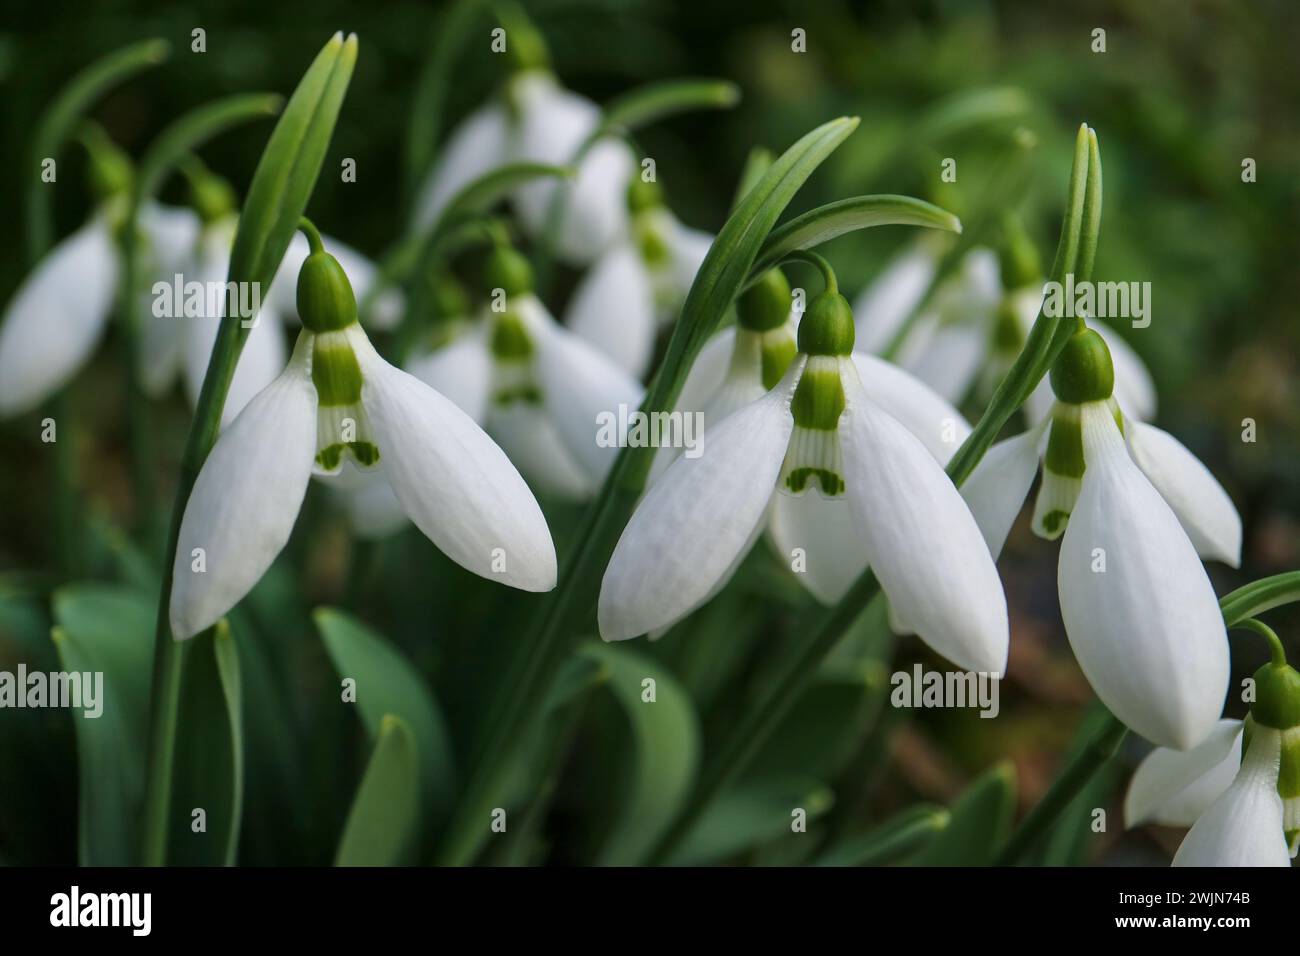 White snowdrops with delicate petals and green leaves in the garden, first snowdrops macro,  spring flowers, blossom, beauty in nature, floral photo Stock Photo